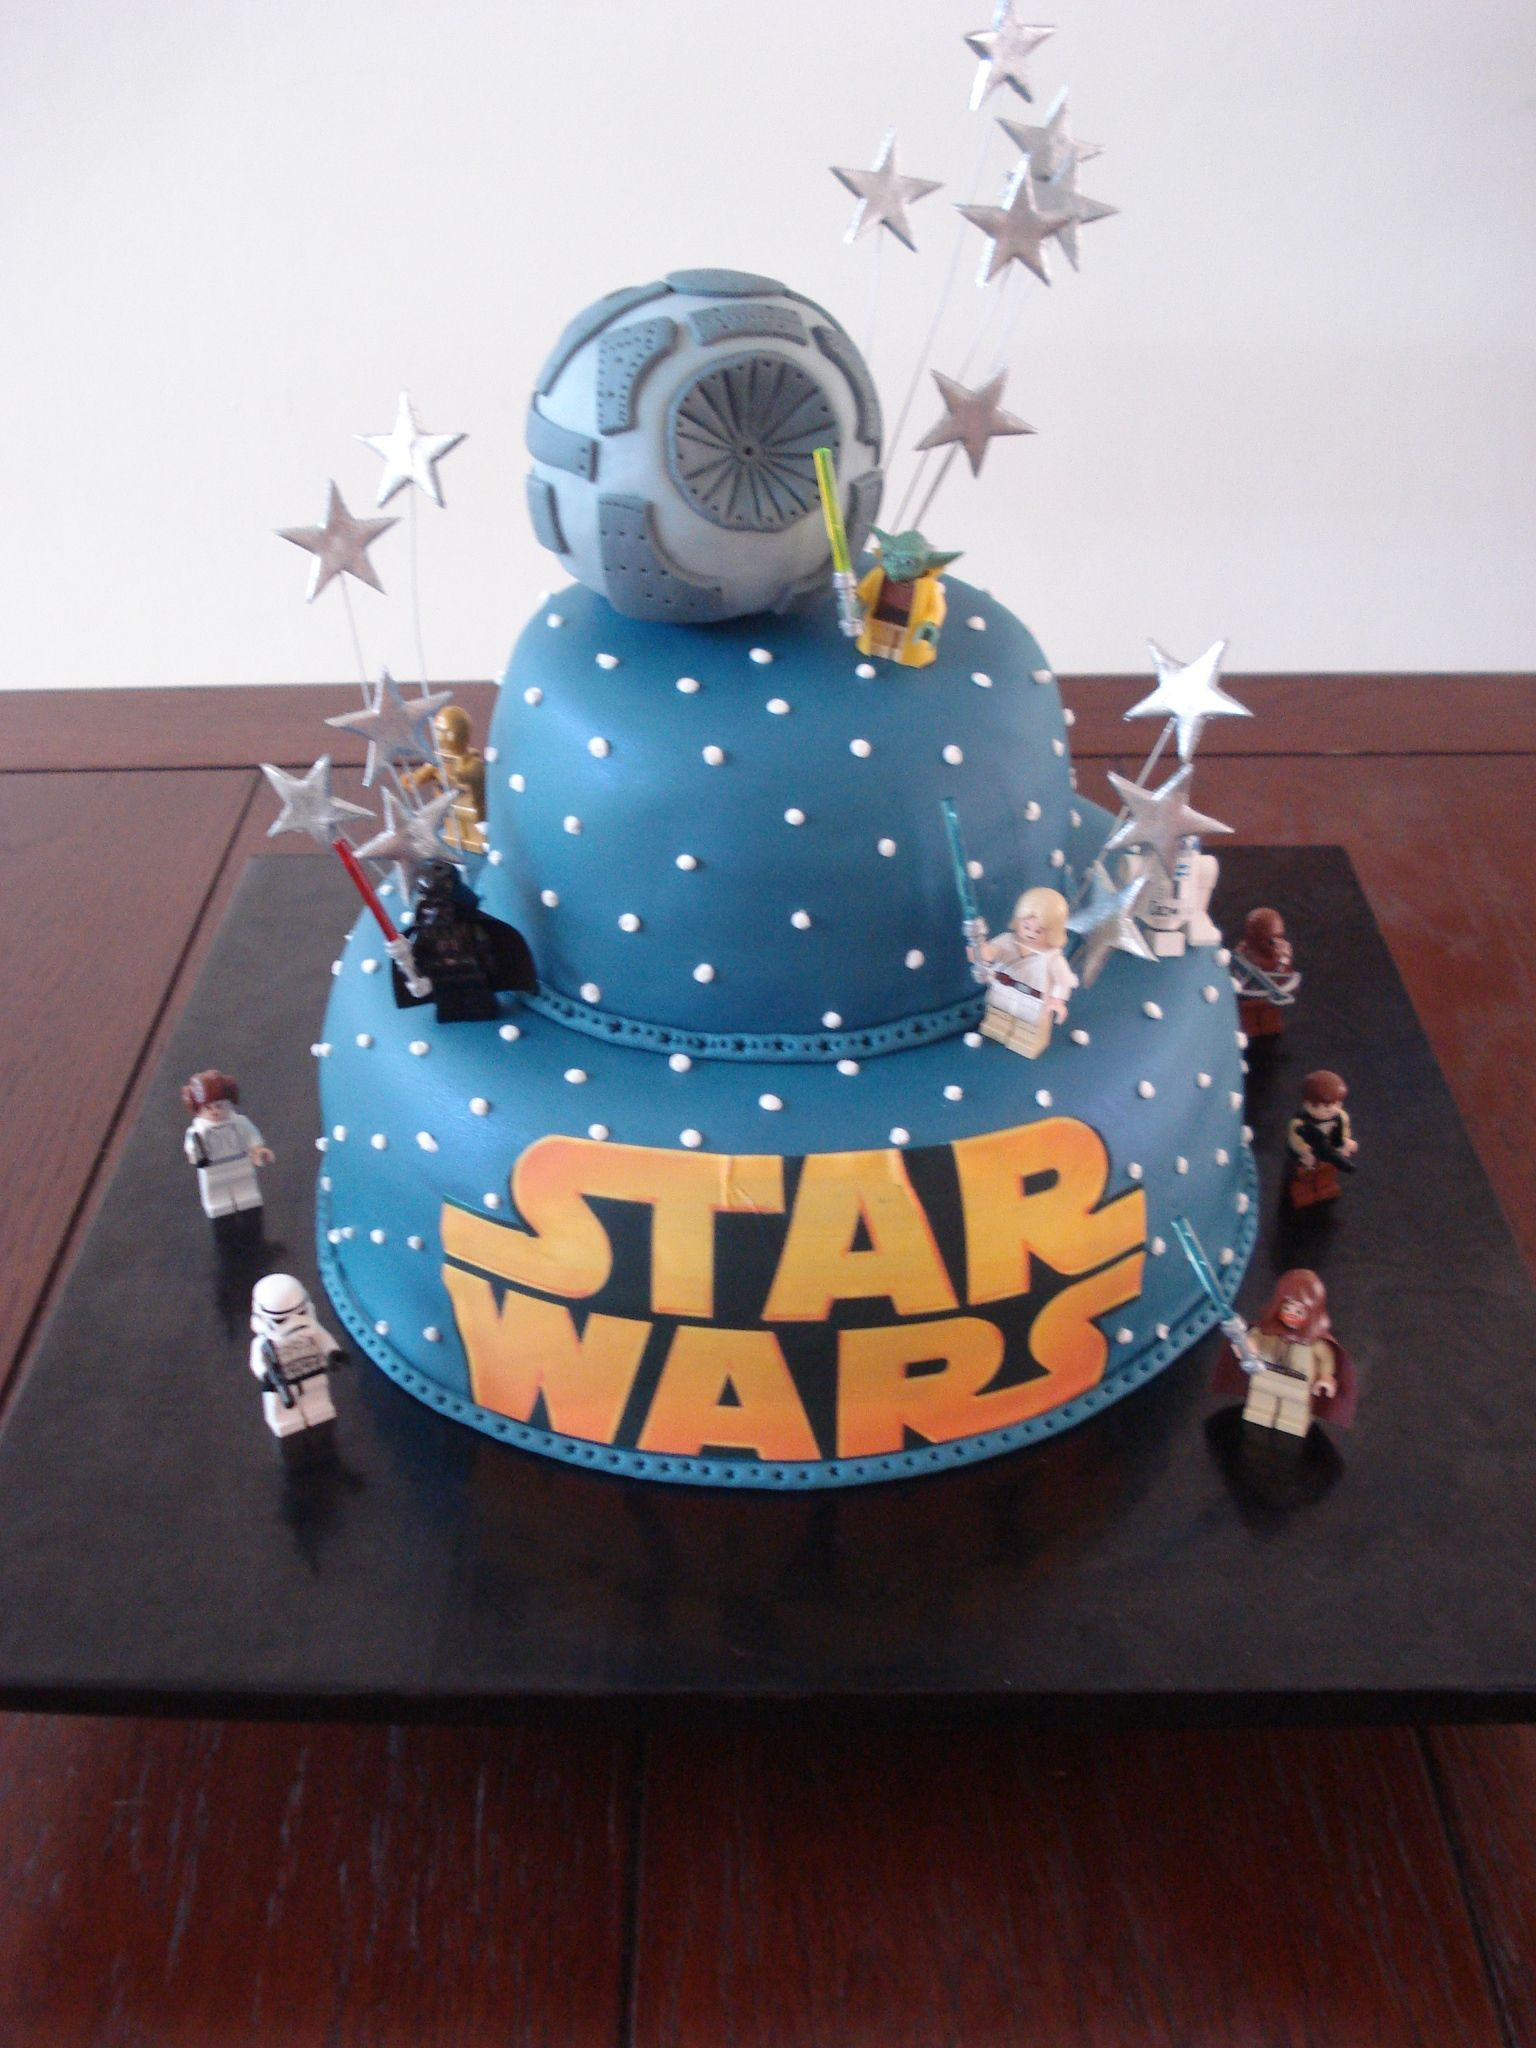 Star Wars Birthday Cake Decorations
 Star Wars cake For all your cake decorating supplies